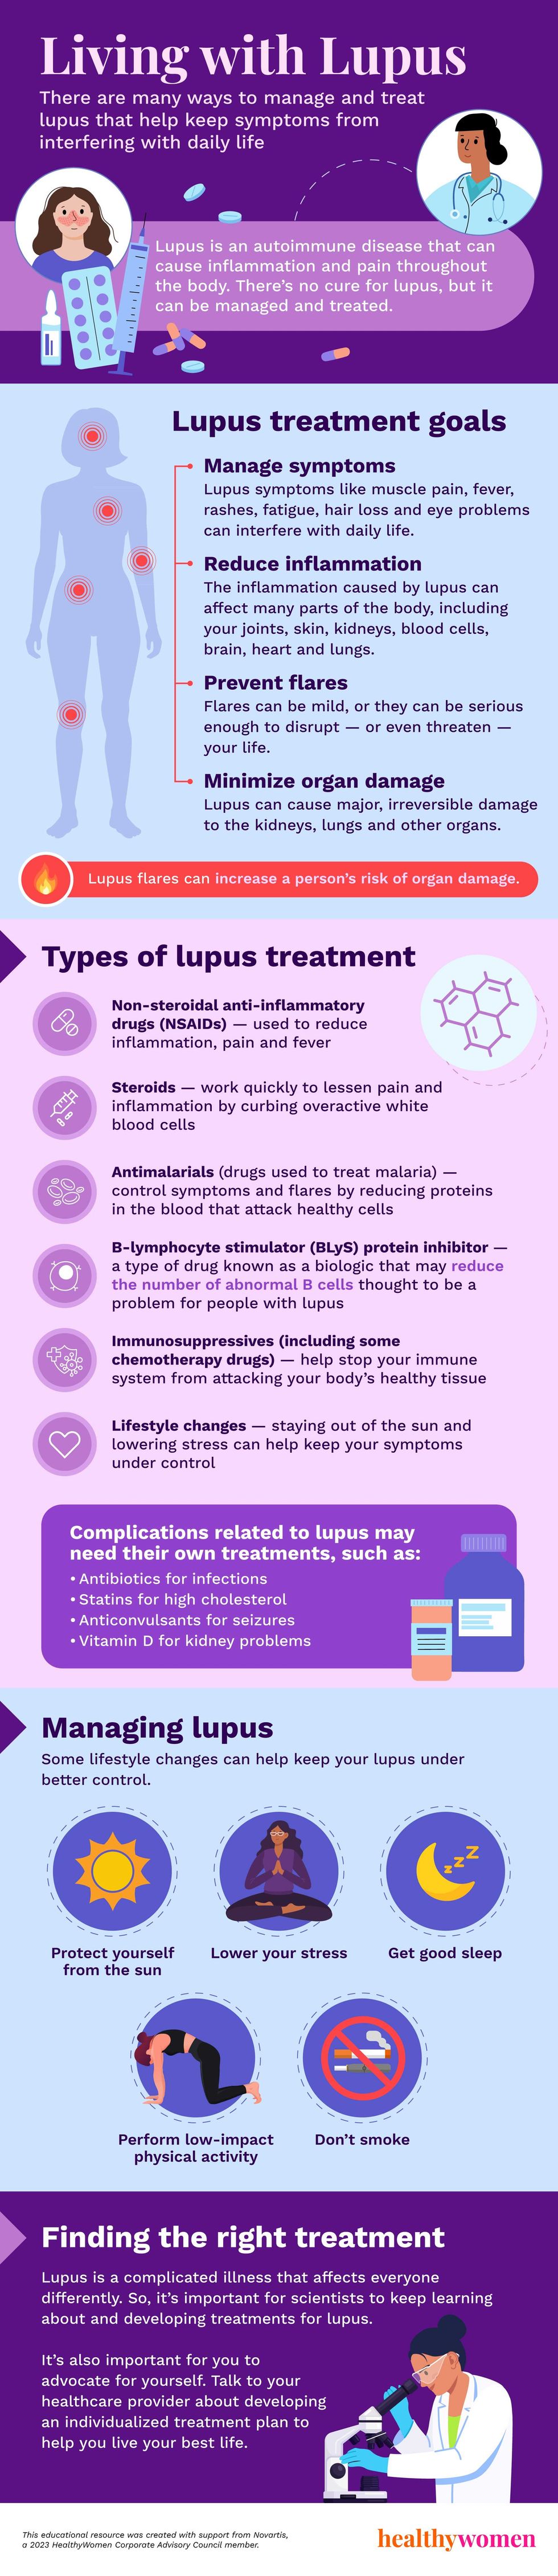 Living with Lupus Infographic. Click image to view PDF